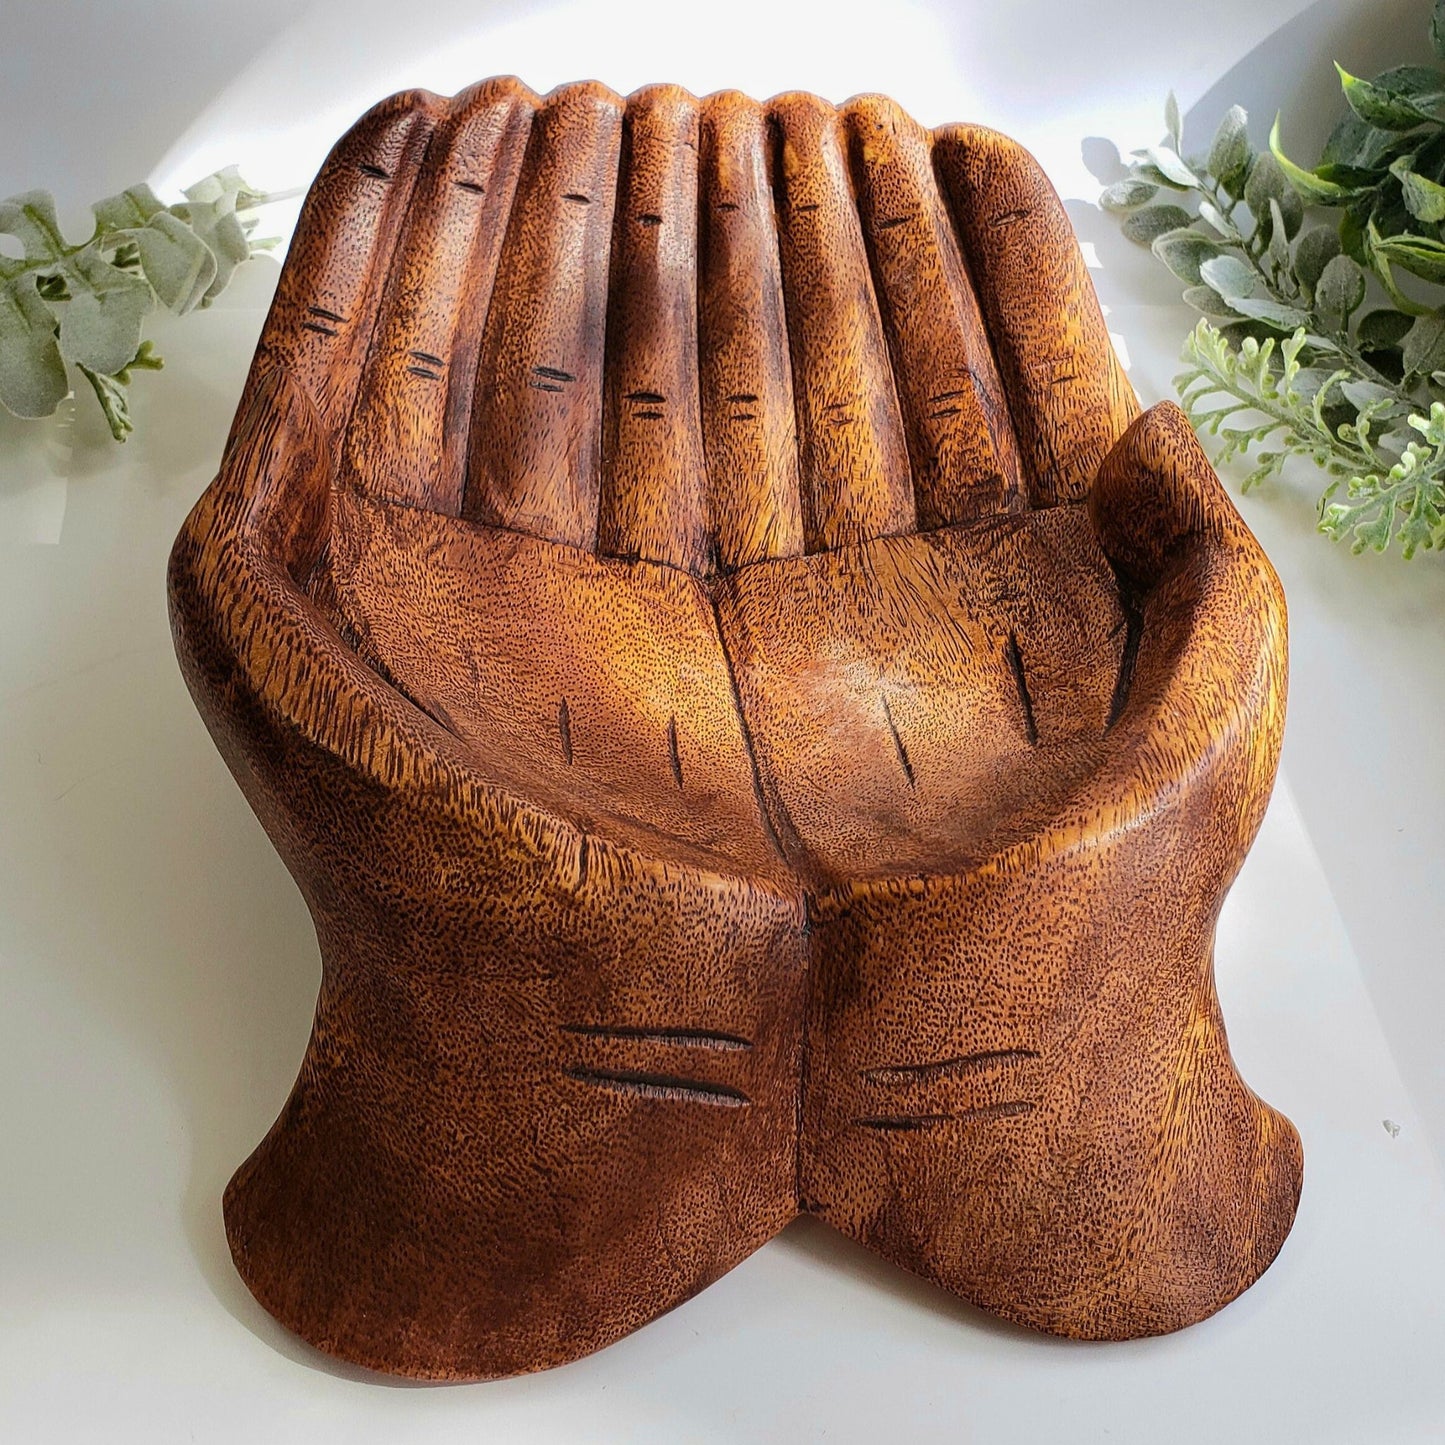 Artisanal Wooden Bowl with Open Hands Design